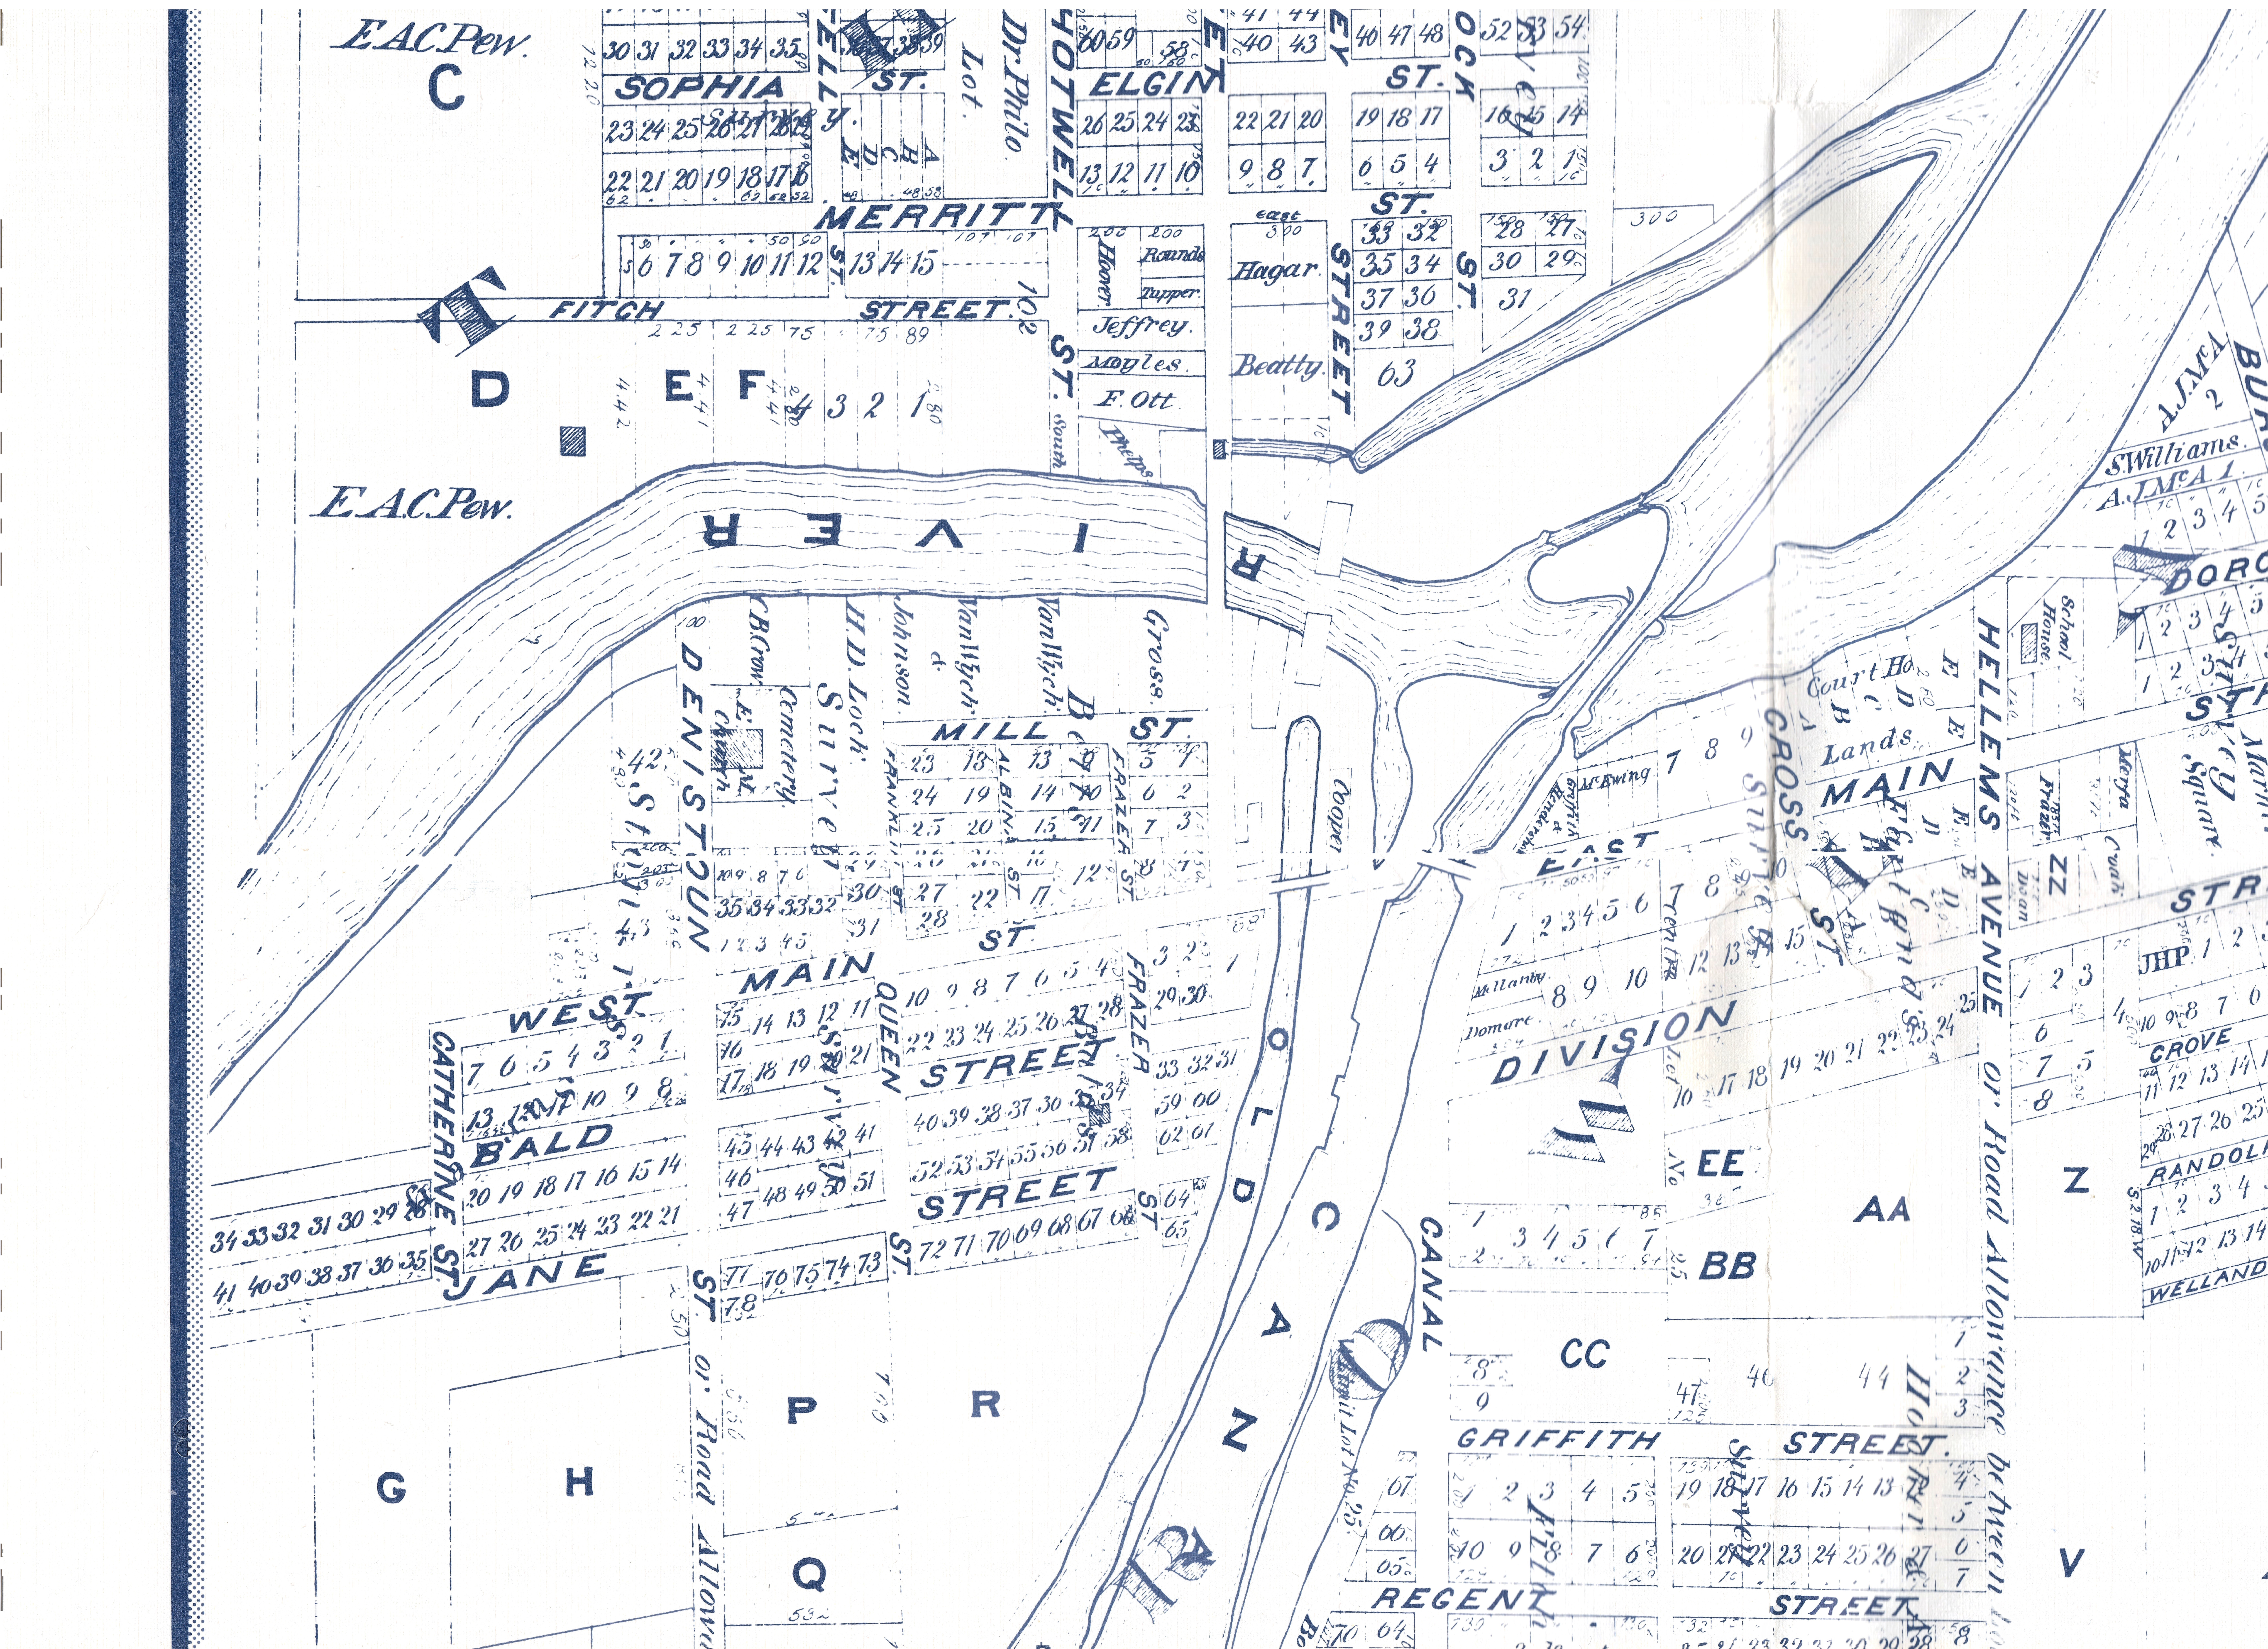 The bottom left corner of a map of Welland from 1876.